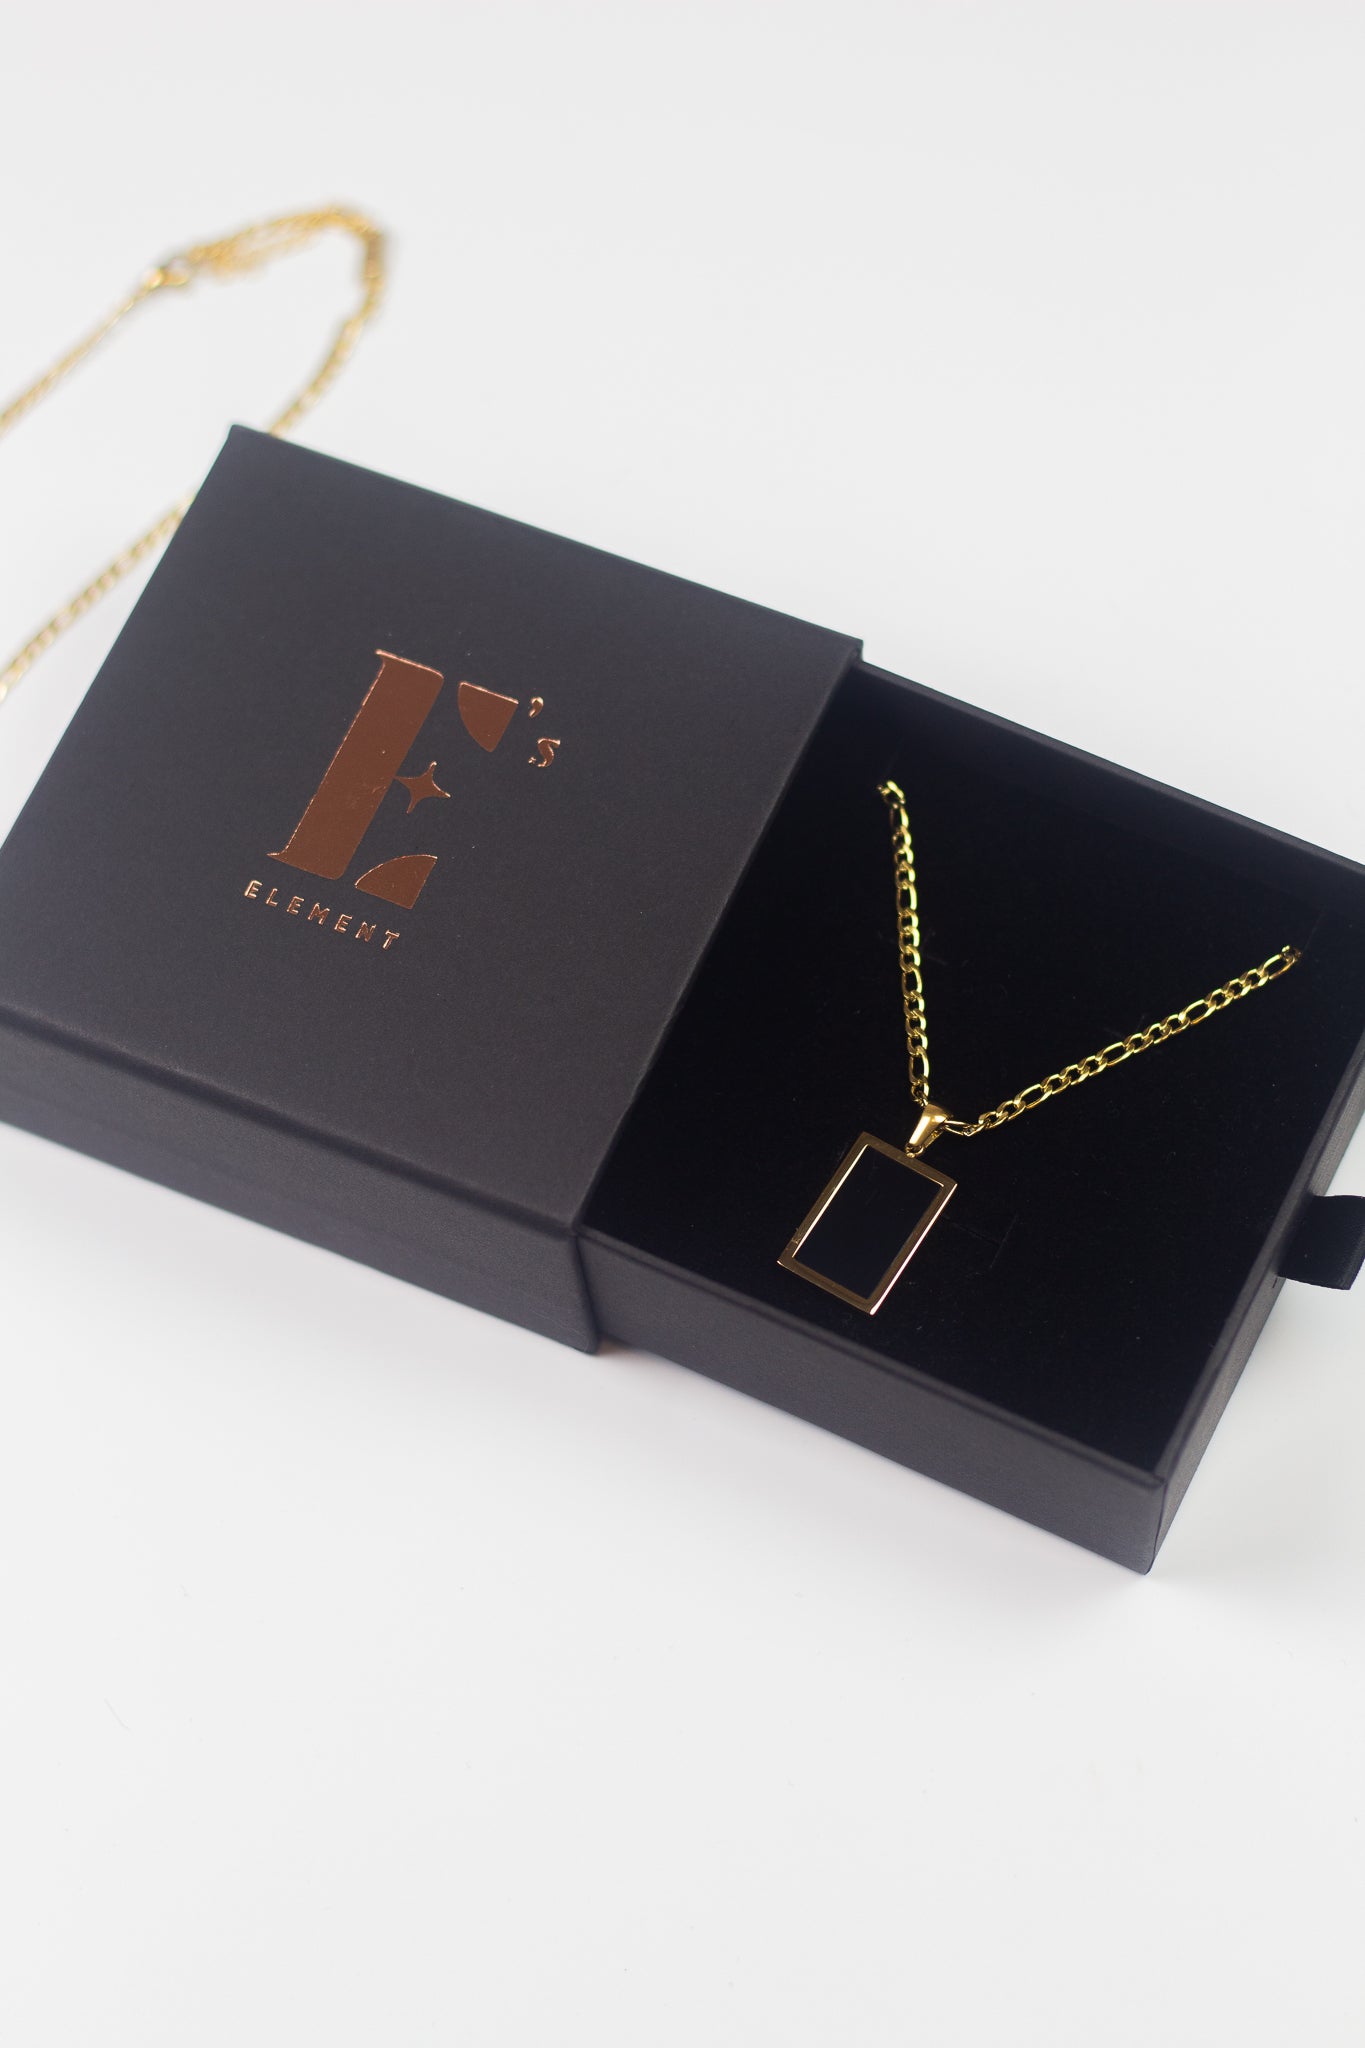 18k gold necklace with a black rectangular charm placed in its container. On the left is the cap for the container with the E's Element imprinted in gold. The Infinity Zircon Necklace by E's Element. 